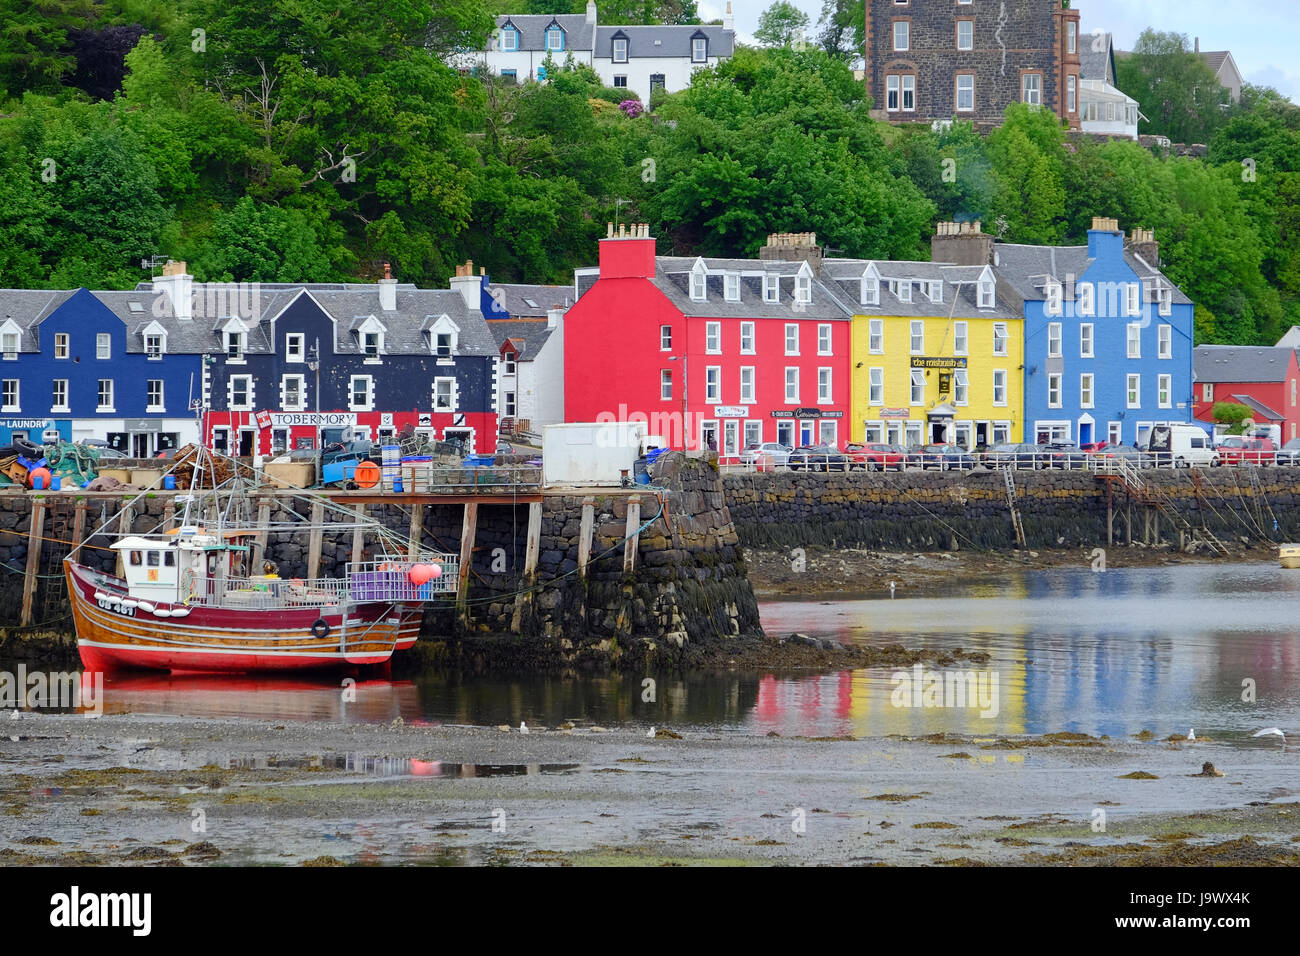 The brightly painted buildings on the waterfront with fishing boats in the harbour, Tobermory, Mull, Scotland Stock Photo